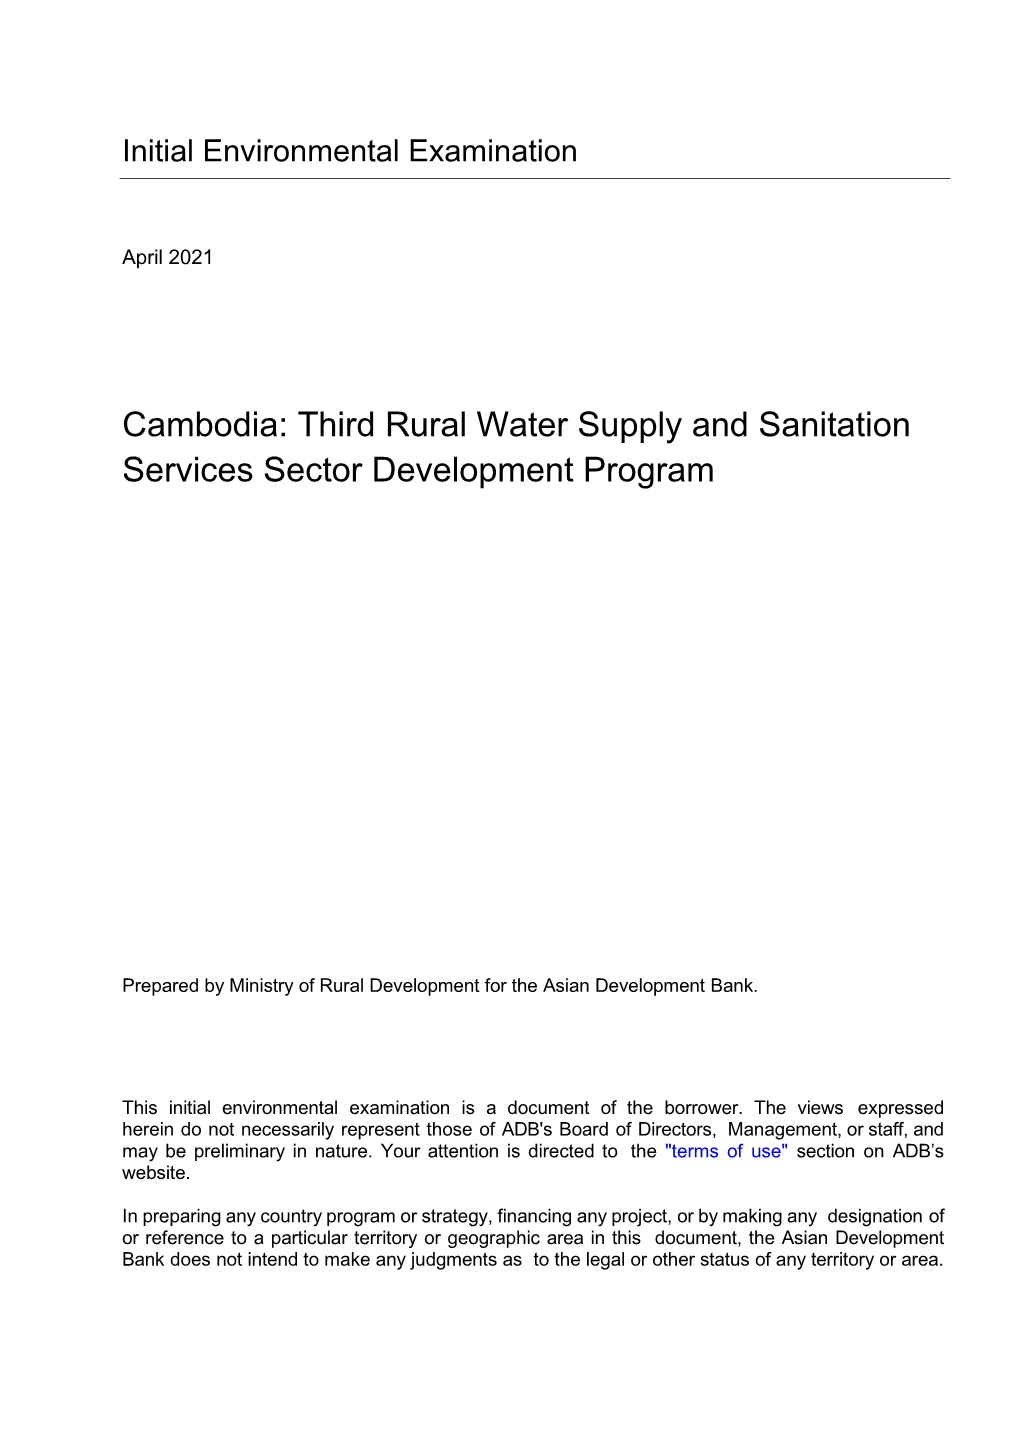 Cambodia: Third Rural Water Supply and Sanitation Services Sector Development Program